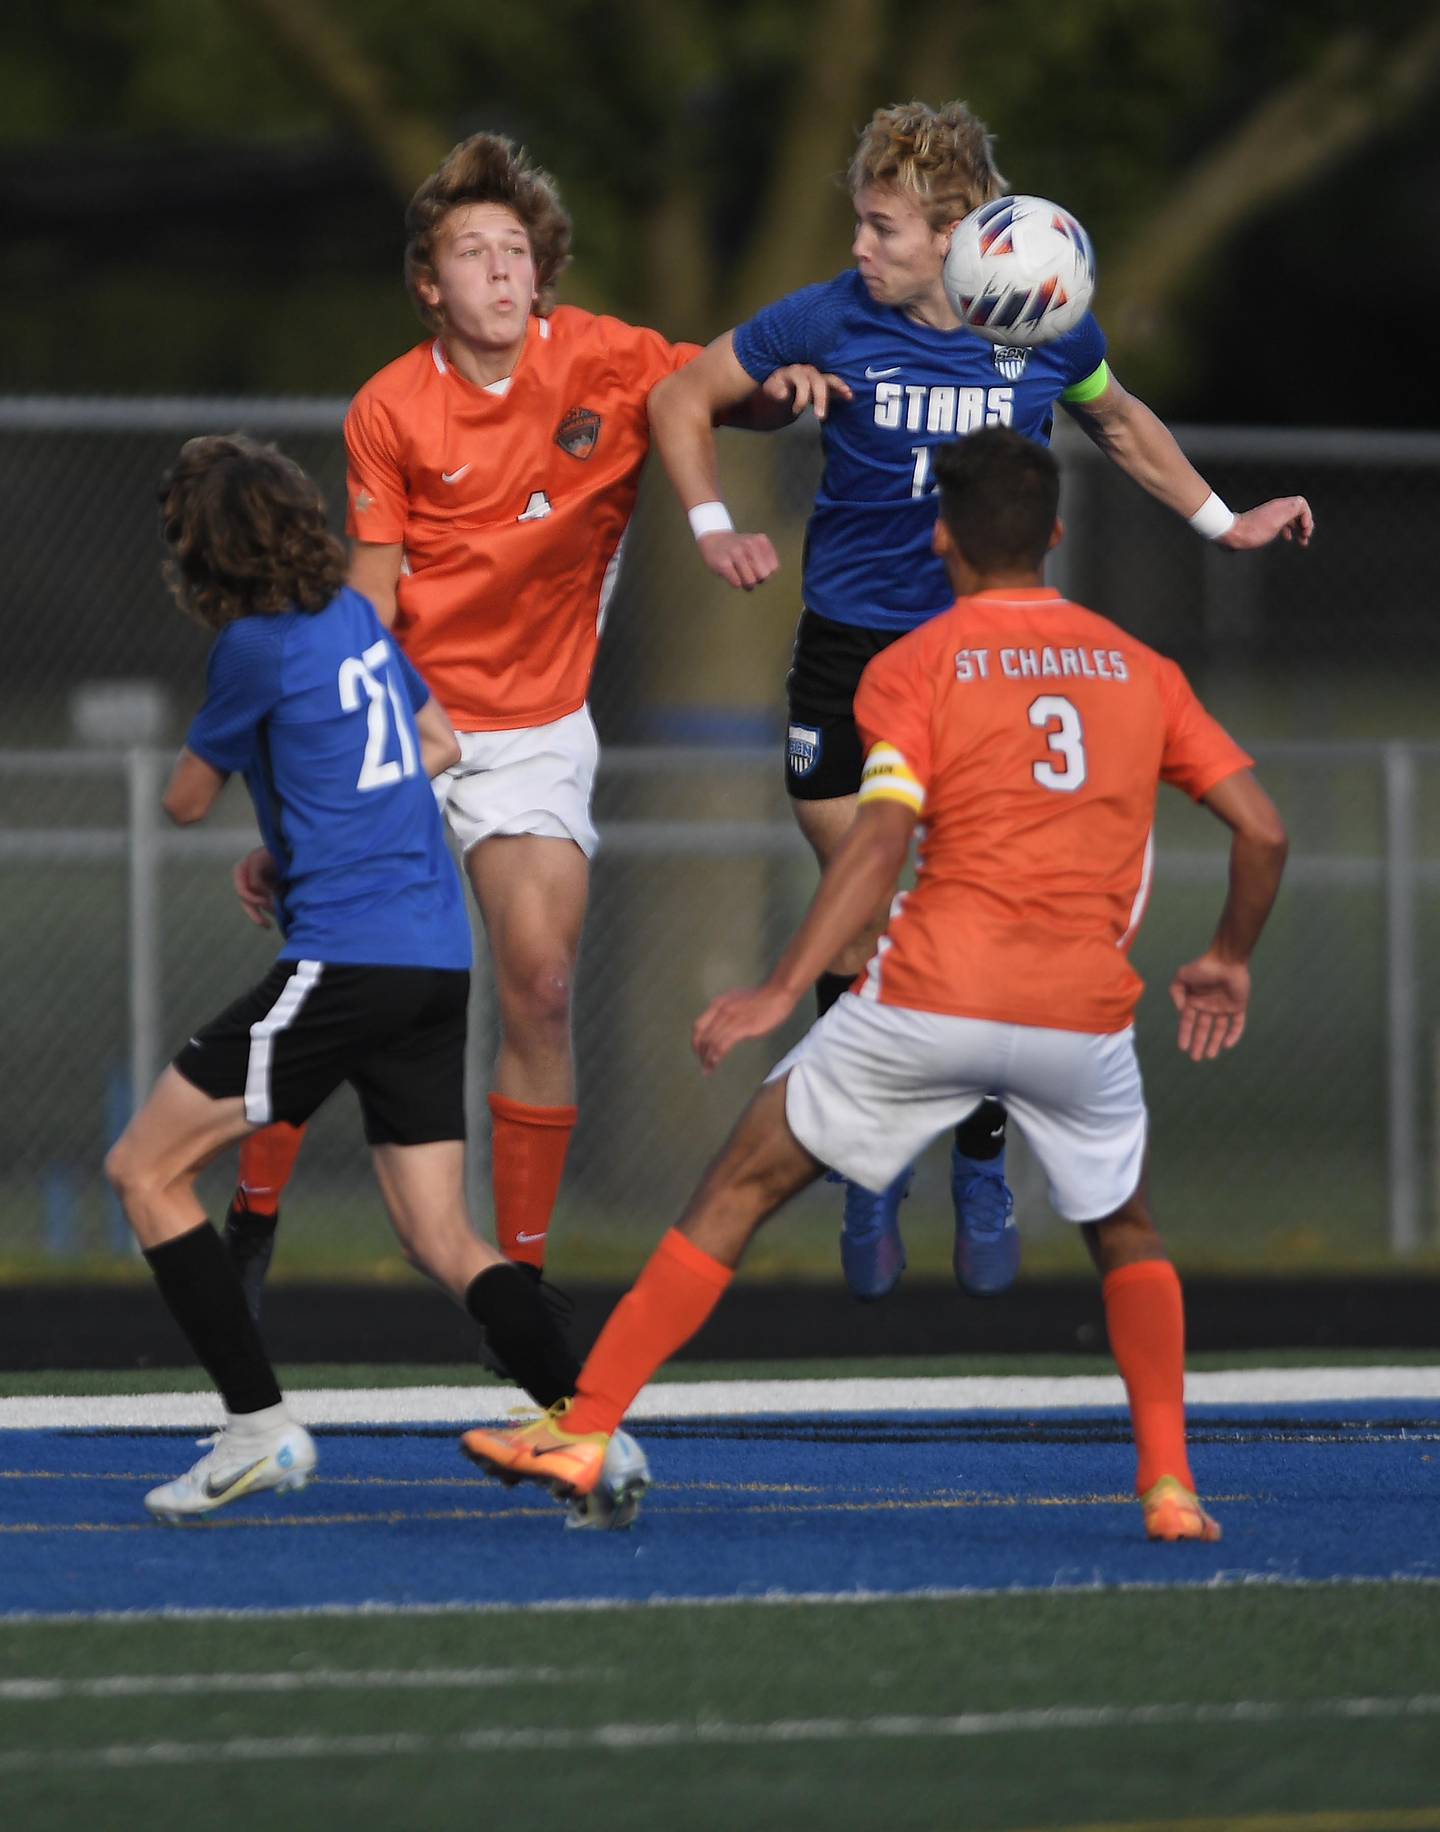 John Starks/jstarks@dailyherald.com
St. Charles North’s Charlie Mazurek, right, and St. Charles East’s Griffin Counts compete for a header in the TriCities boys soccer night game in Geneva on Tuesday, September 27, 2022.